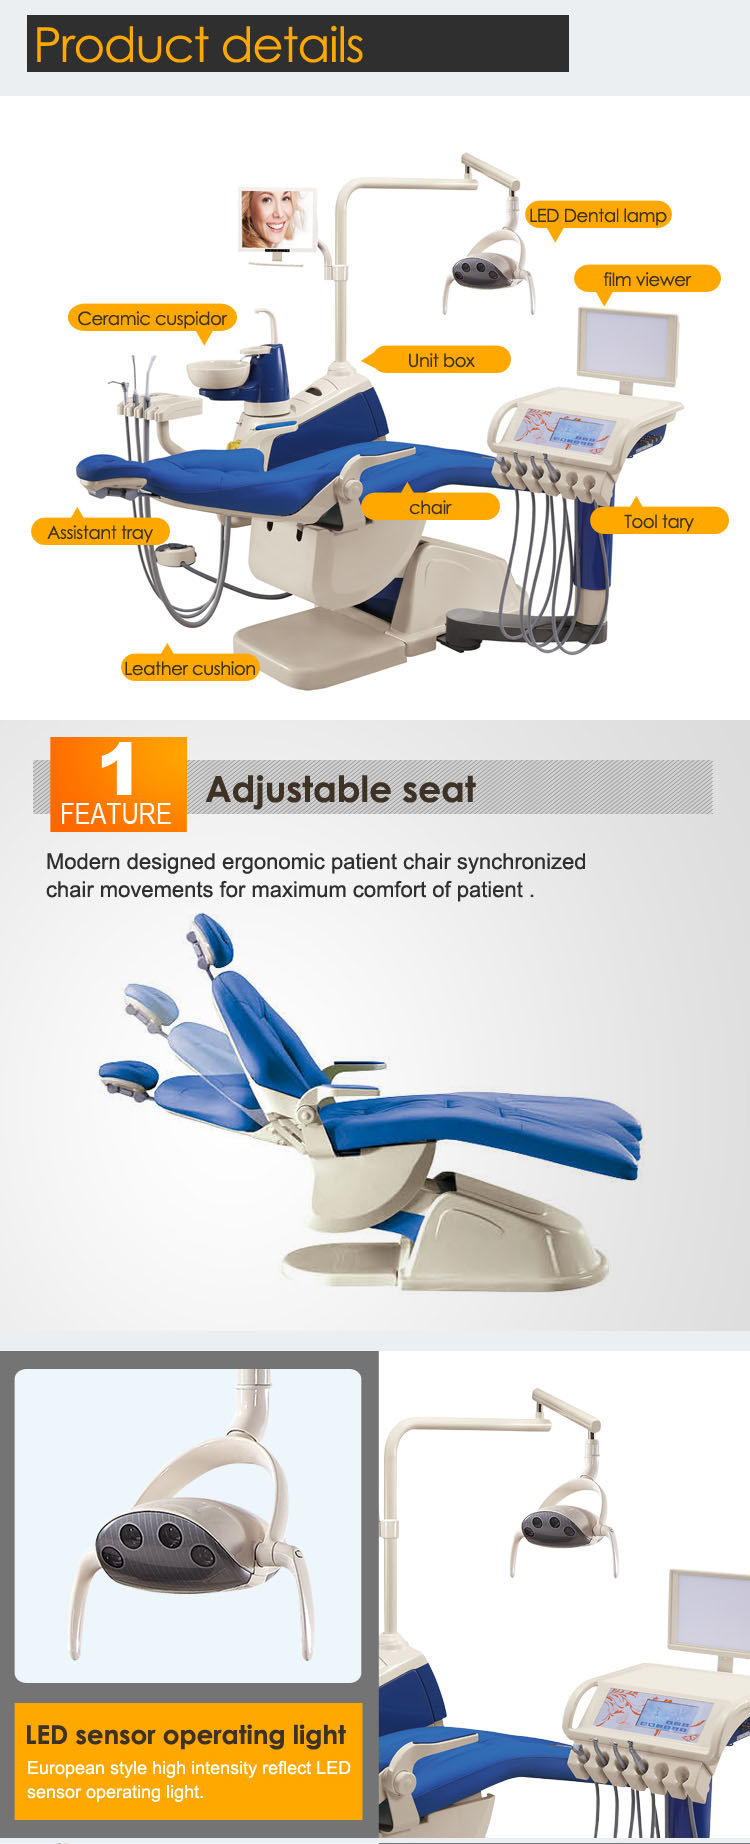 FDA & Ce Approved Gladent Dental Unit Equipment with Sliding Cart